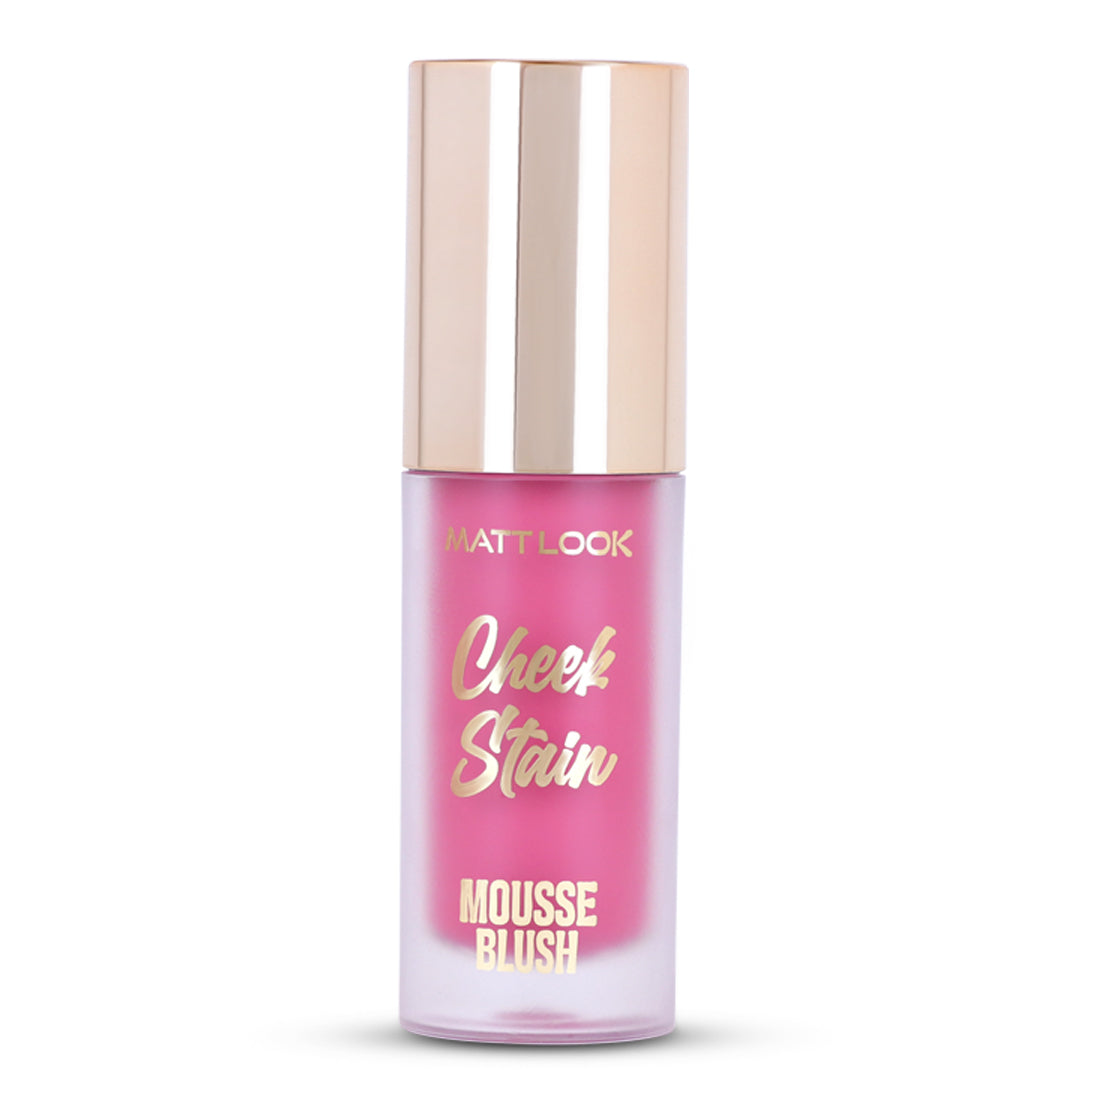 Mattlook Cheek Stain Mousse Blush, Infused with Hyaluronic acid  and Vitamin E, Long lasting formula, Natural Radiant finish